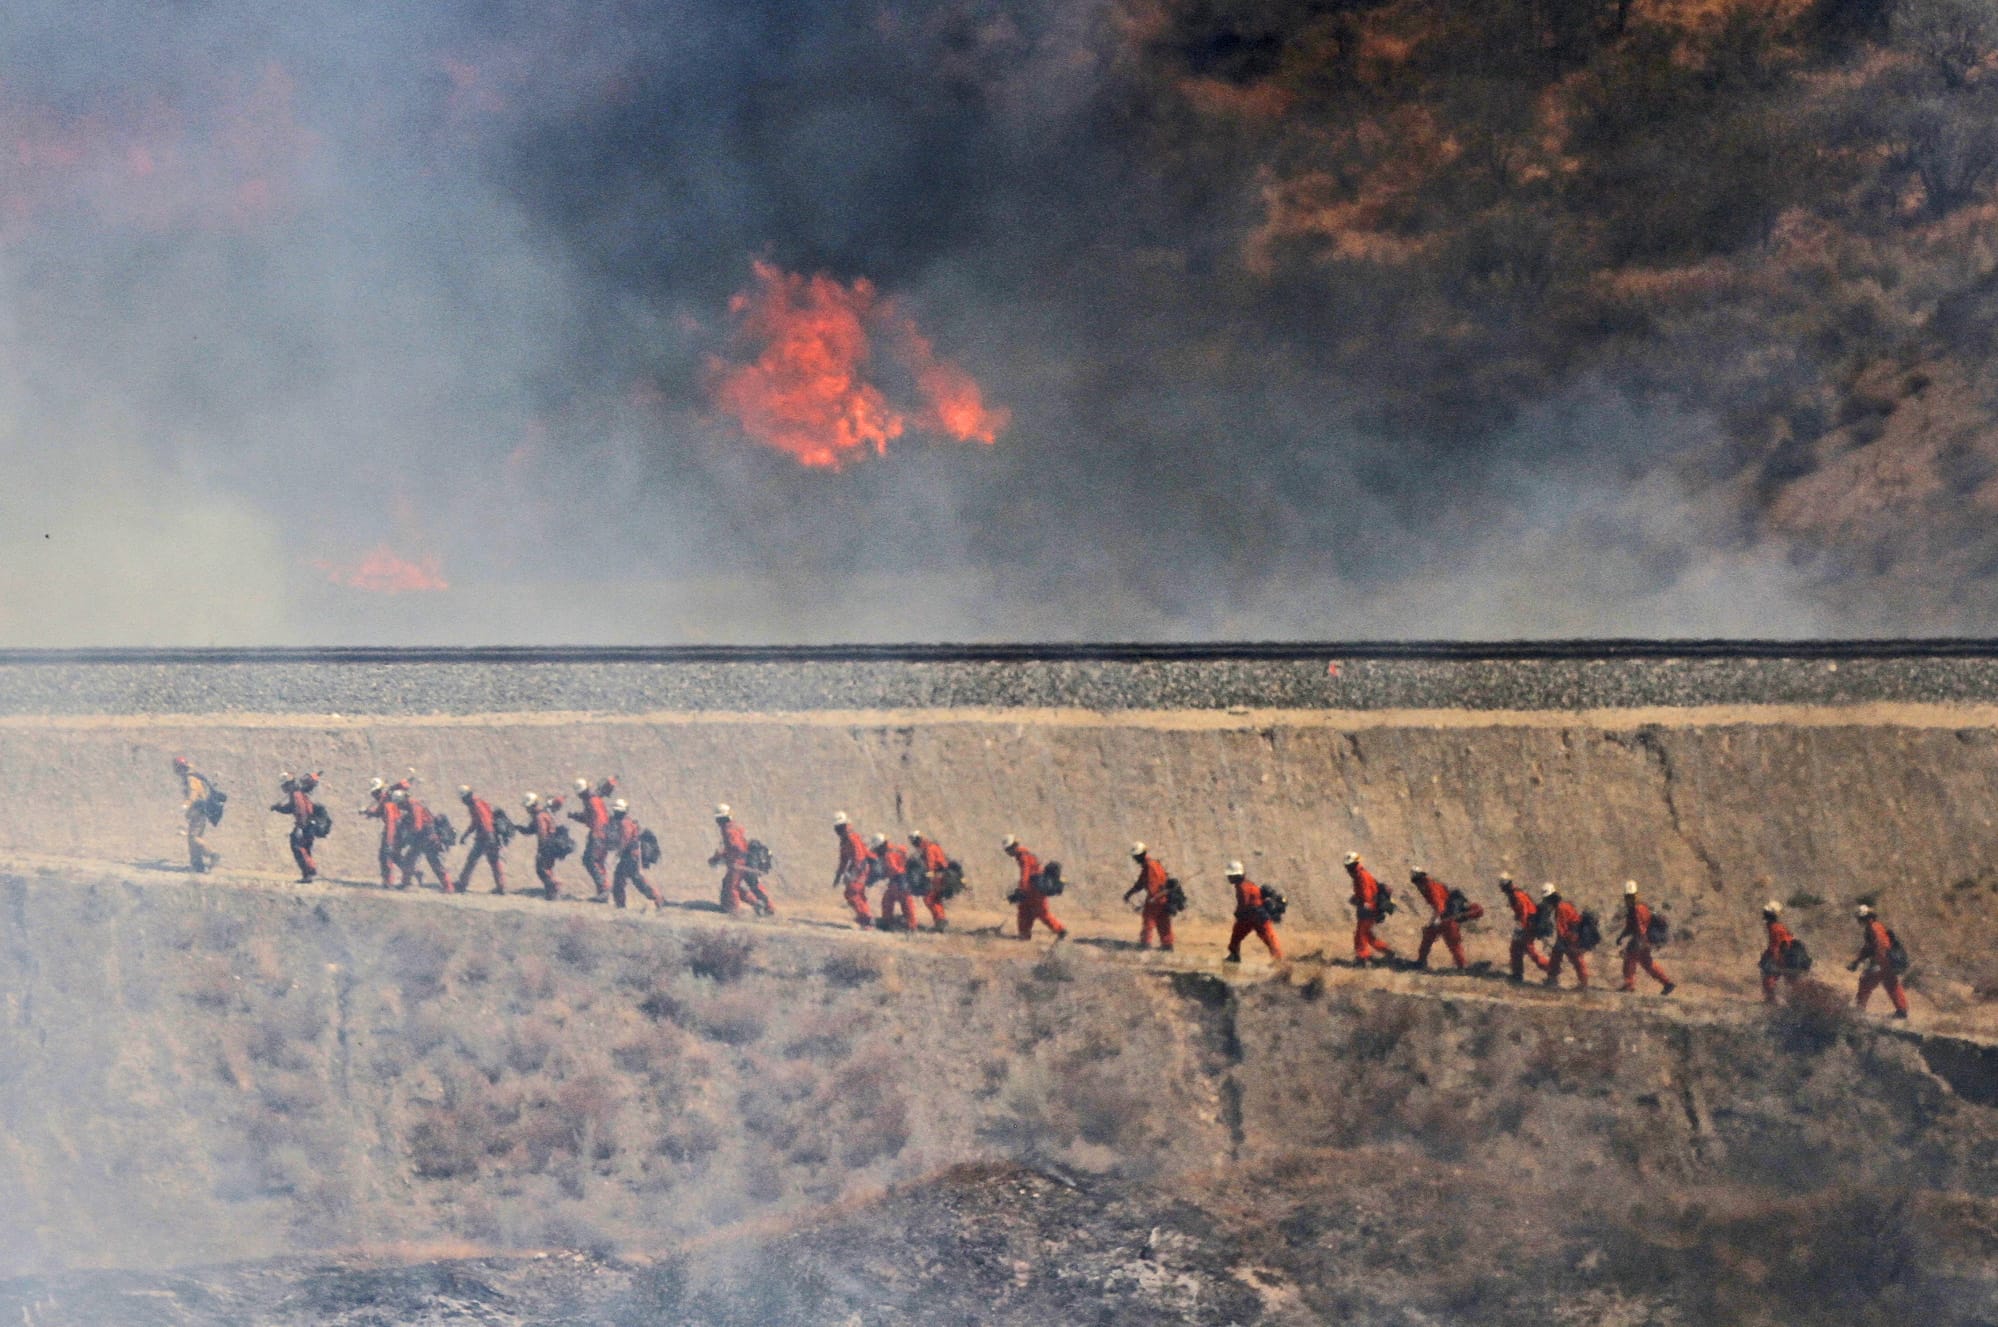 A fire crew approaches as a wildfire burns on Friday, July 22, 2016, in Santa Clarita, Calif. The fire erupted shortly after 2 p.m. Friday next to State Route 14 in Santa Clarita. No homes are immediately threatened, but fire officials say evacuations have been ordered from Soledad Canyon to Agua Dulce Canyon Road.